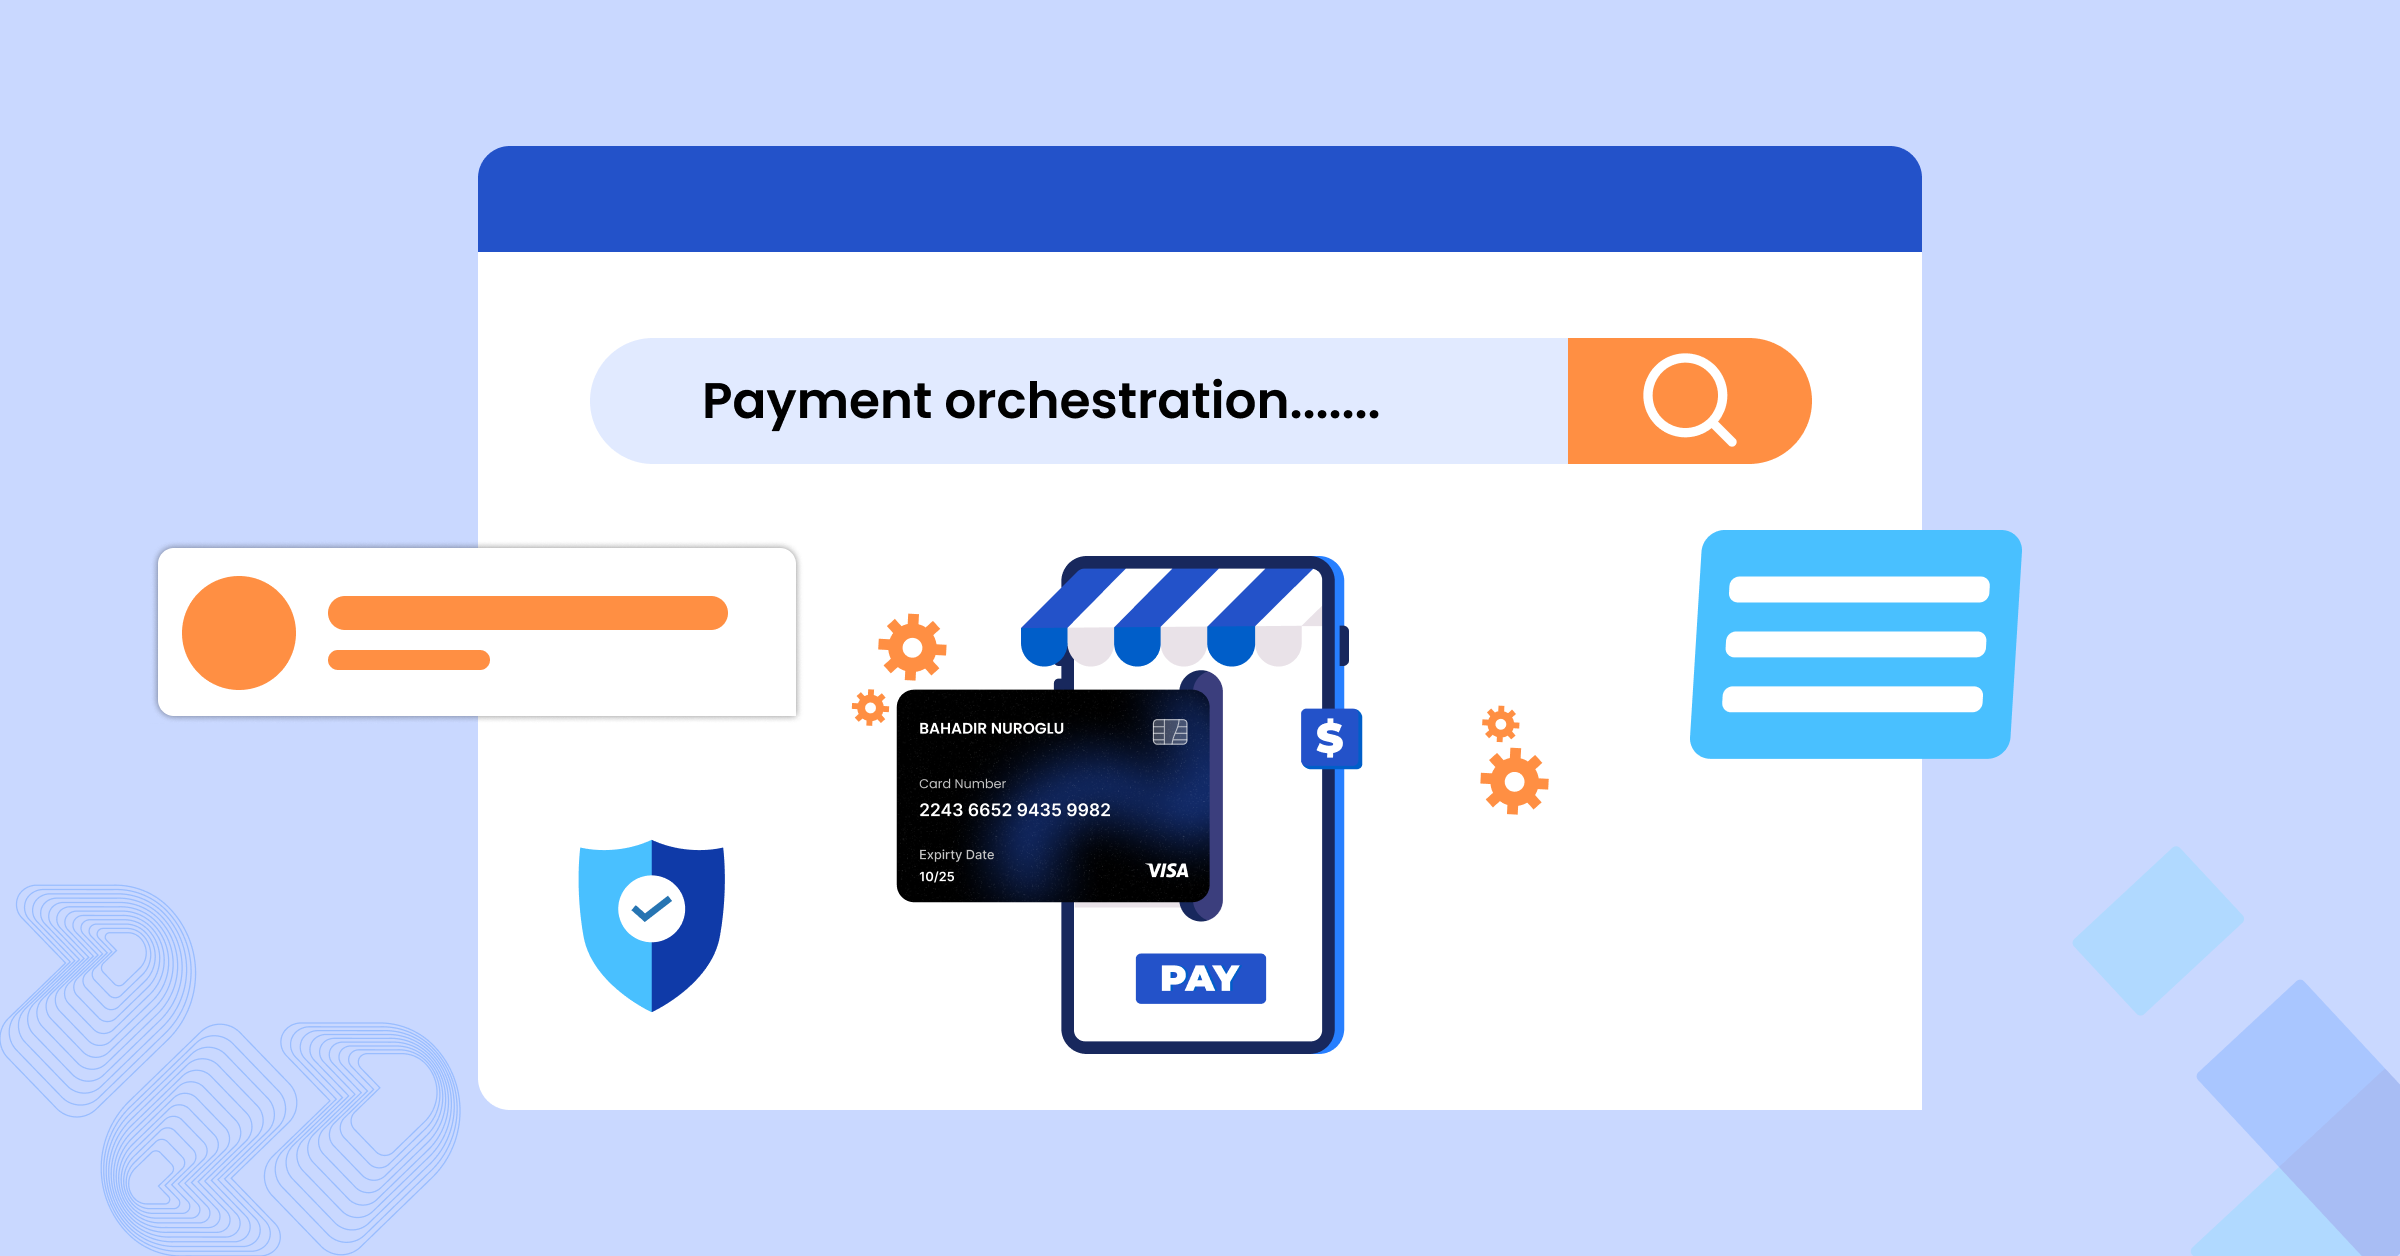 pros and cons of payment orchestration